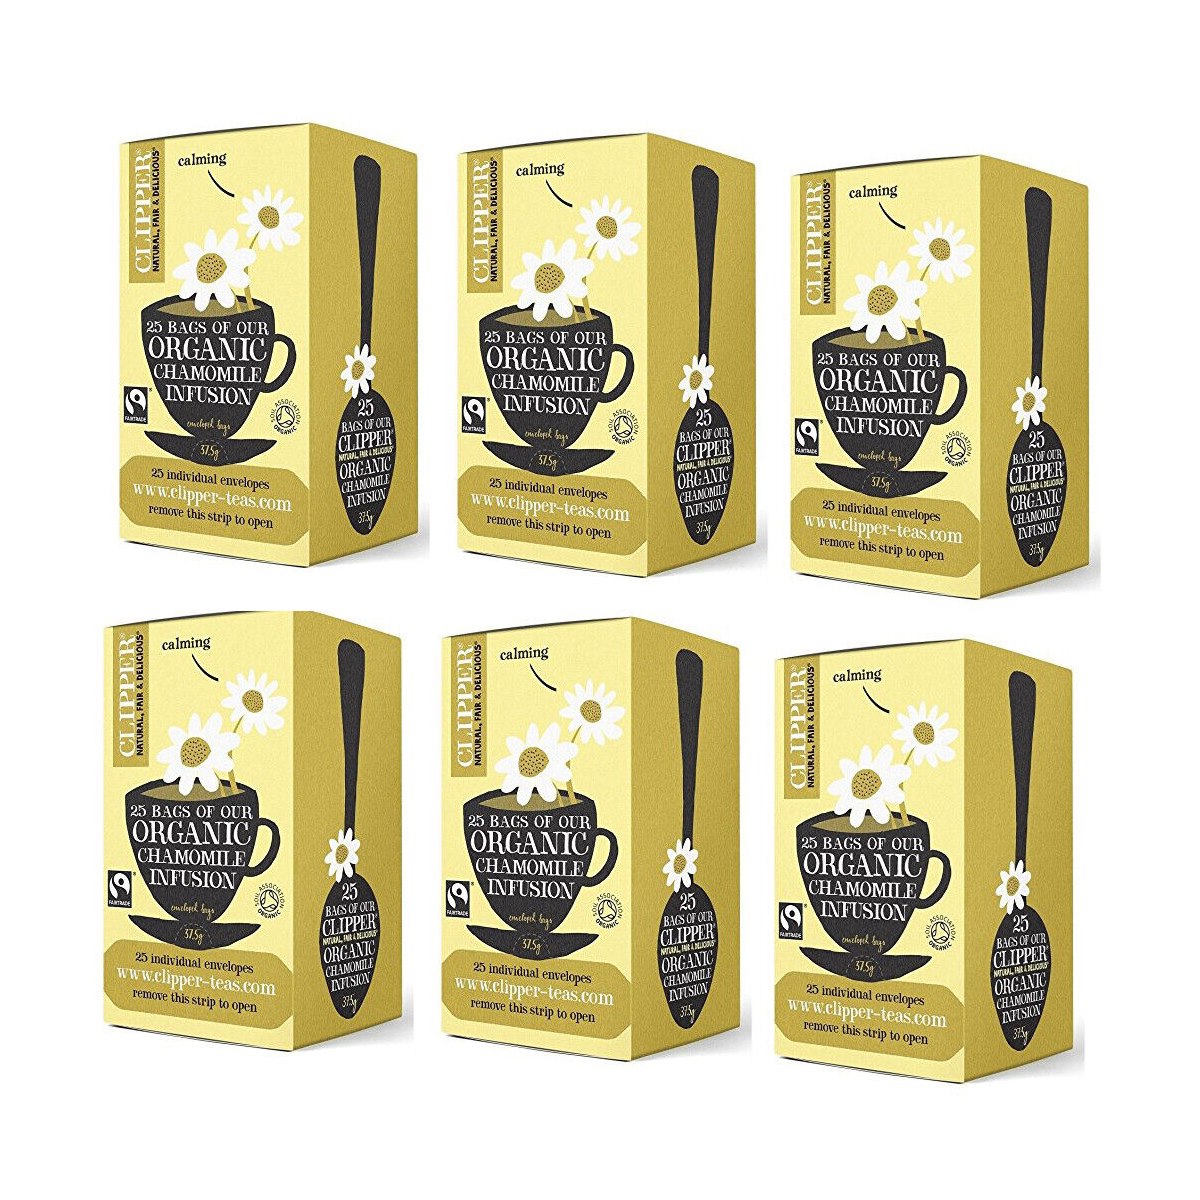 Case of 6 x Clipper Organic Calming Chamomile Infusion 25 Enveloped Bags 37.5g